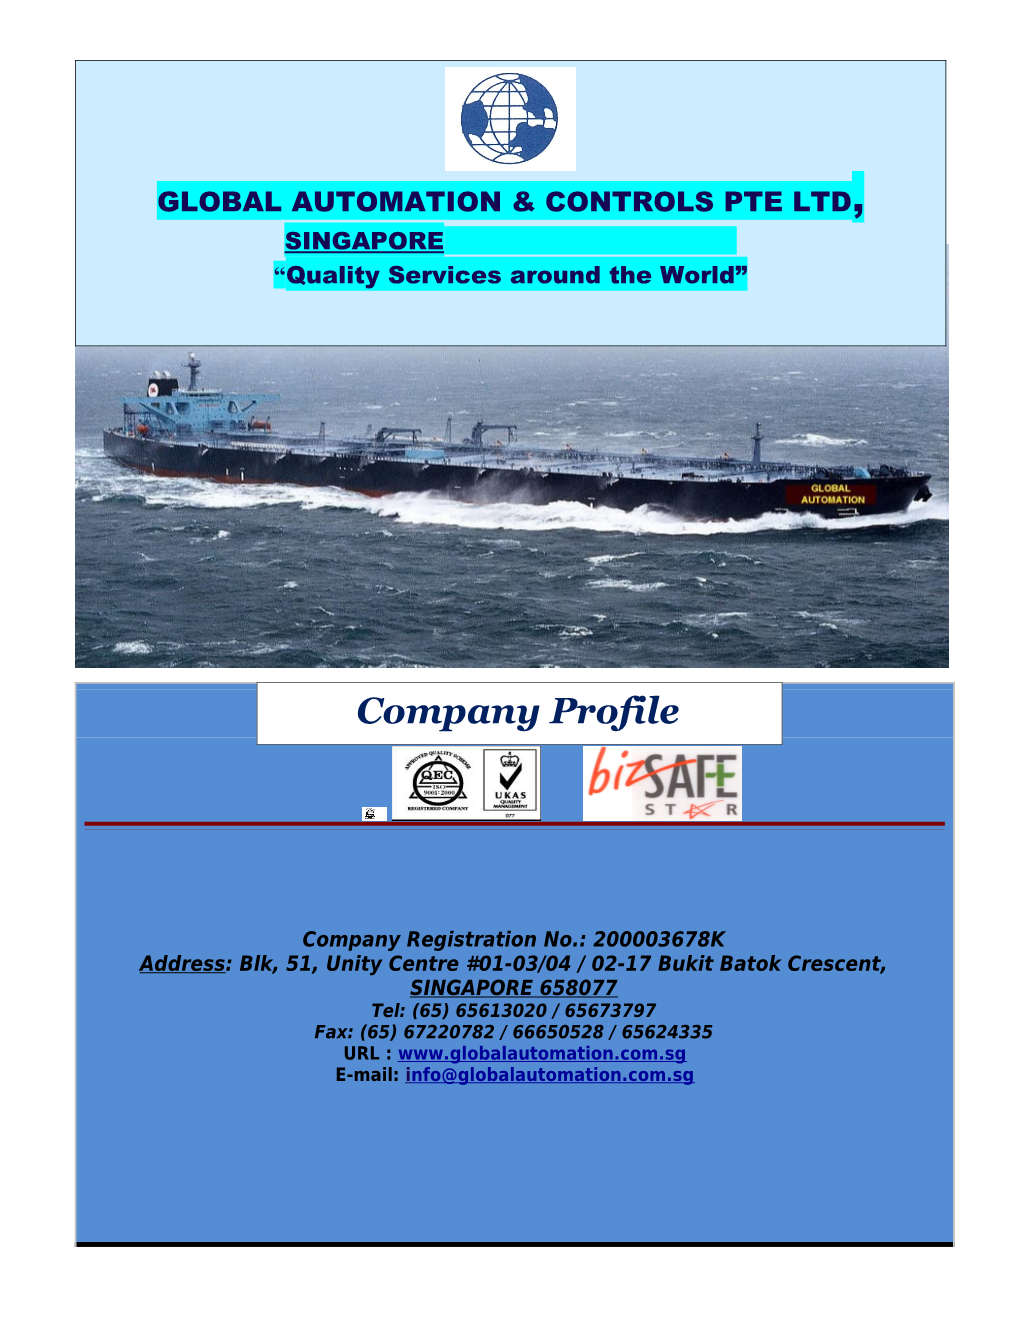 GLOBAL AUTOMATION & CONTROLS PTE LTD (Popularly Known As GAC) Was Incorporated in Singapore